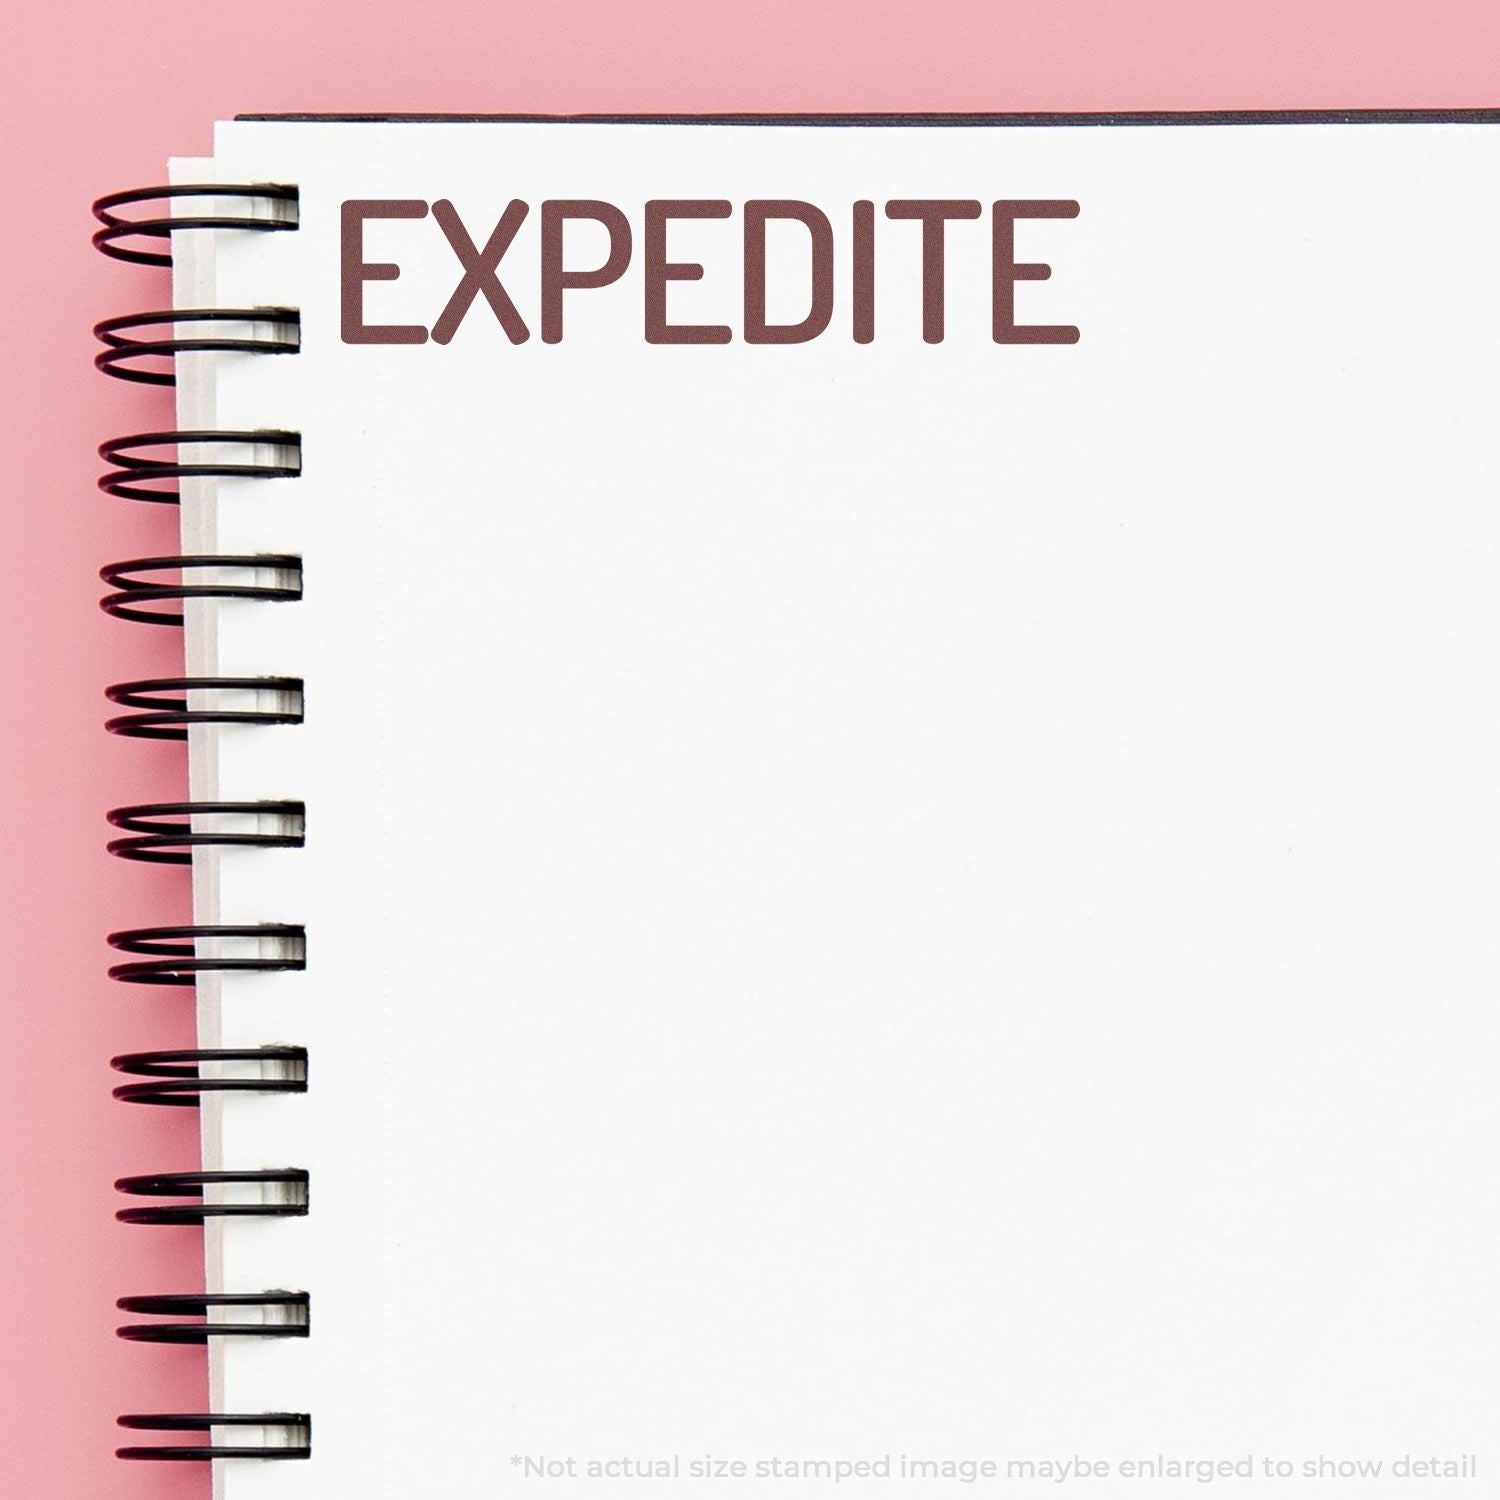 A self-inking stamp with a stamped image showing how the text "EXPEDITE" in a narrow font is displayed after stamping.